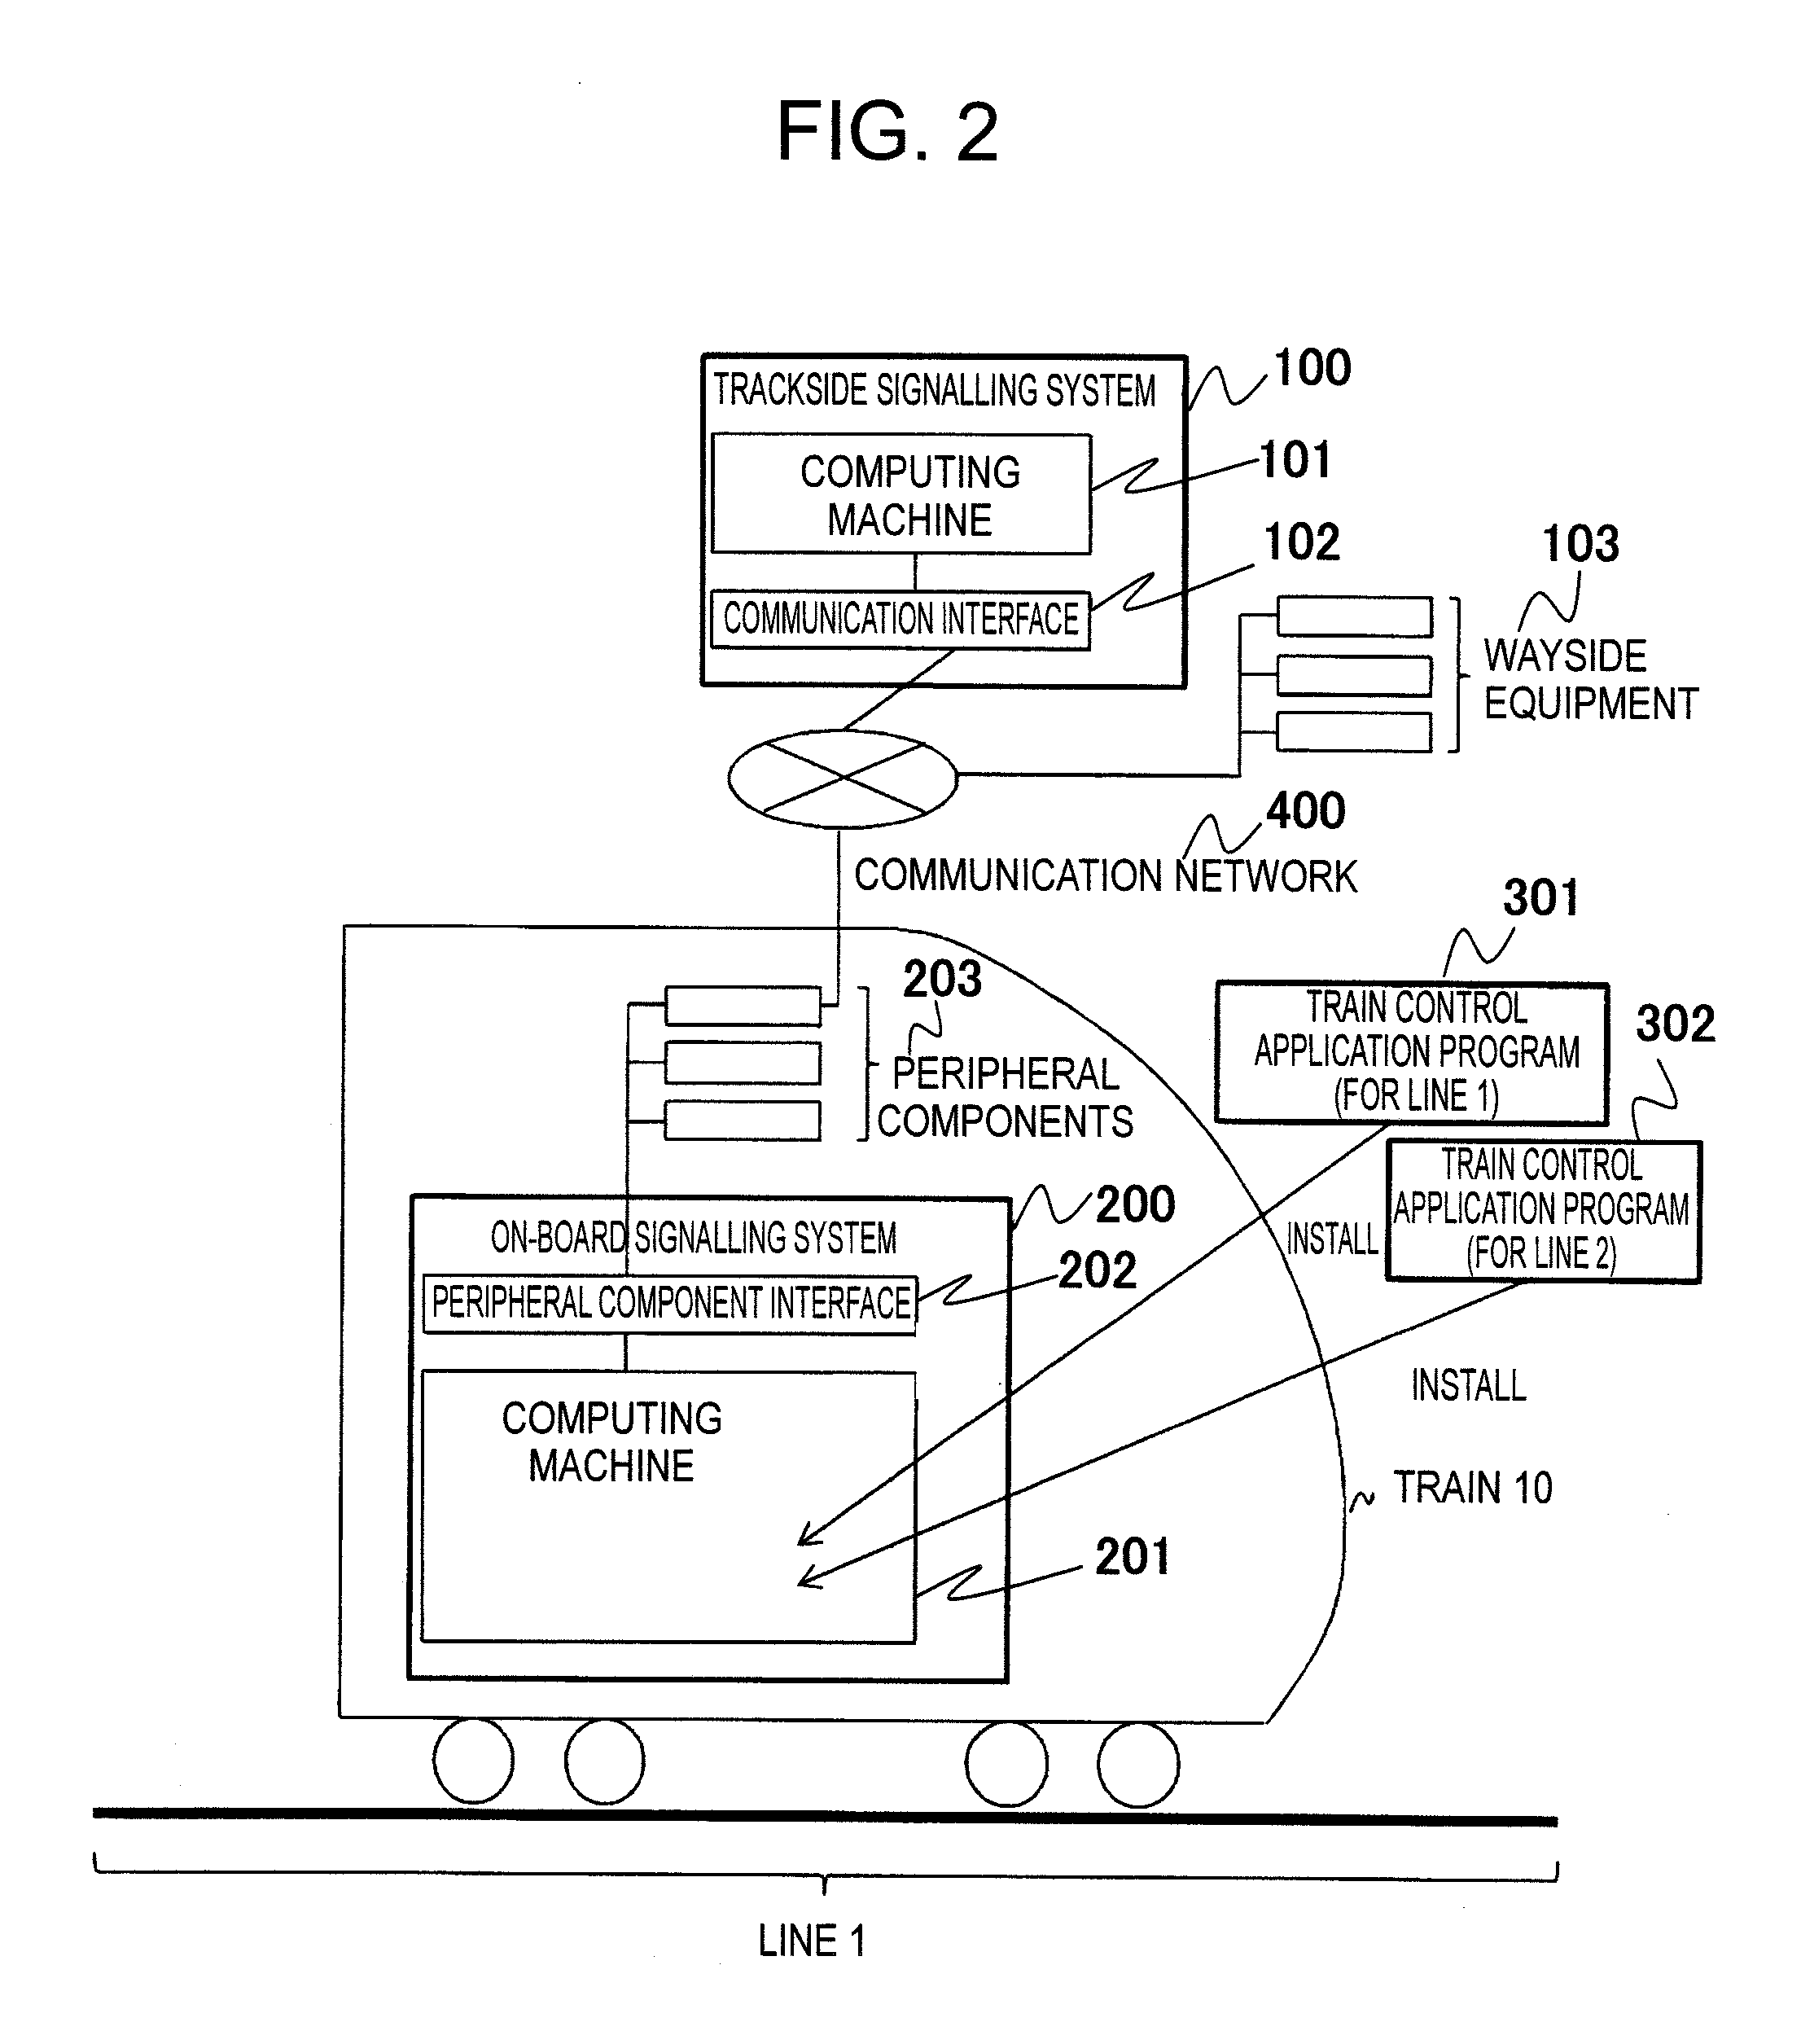 Railway signalling system and on-board signalling system